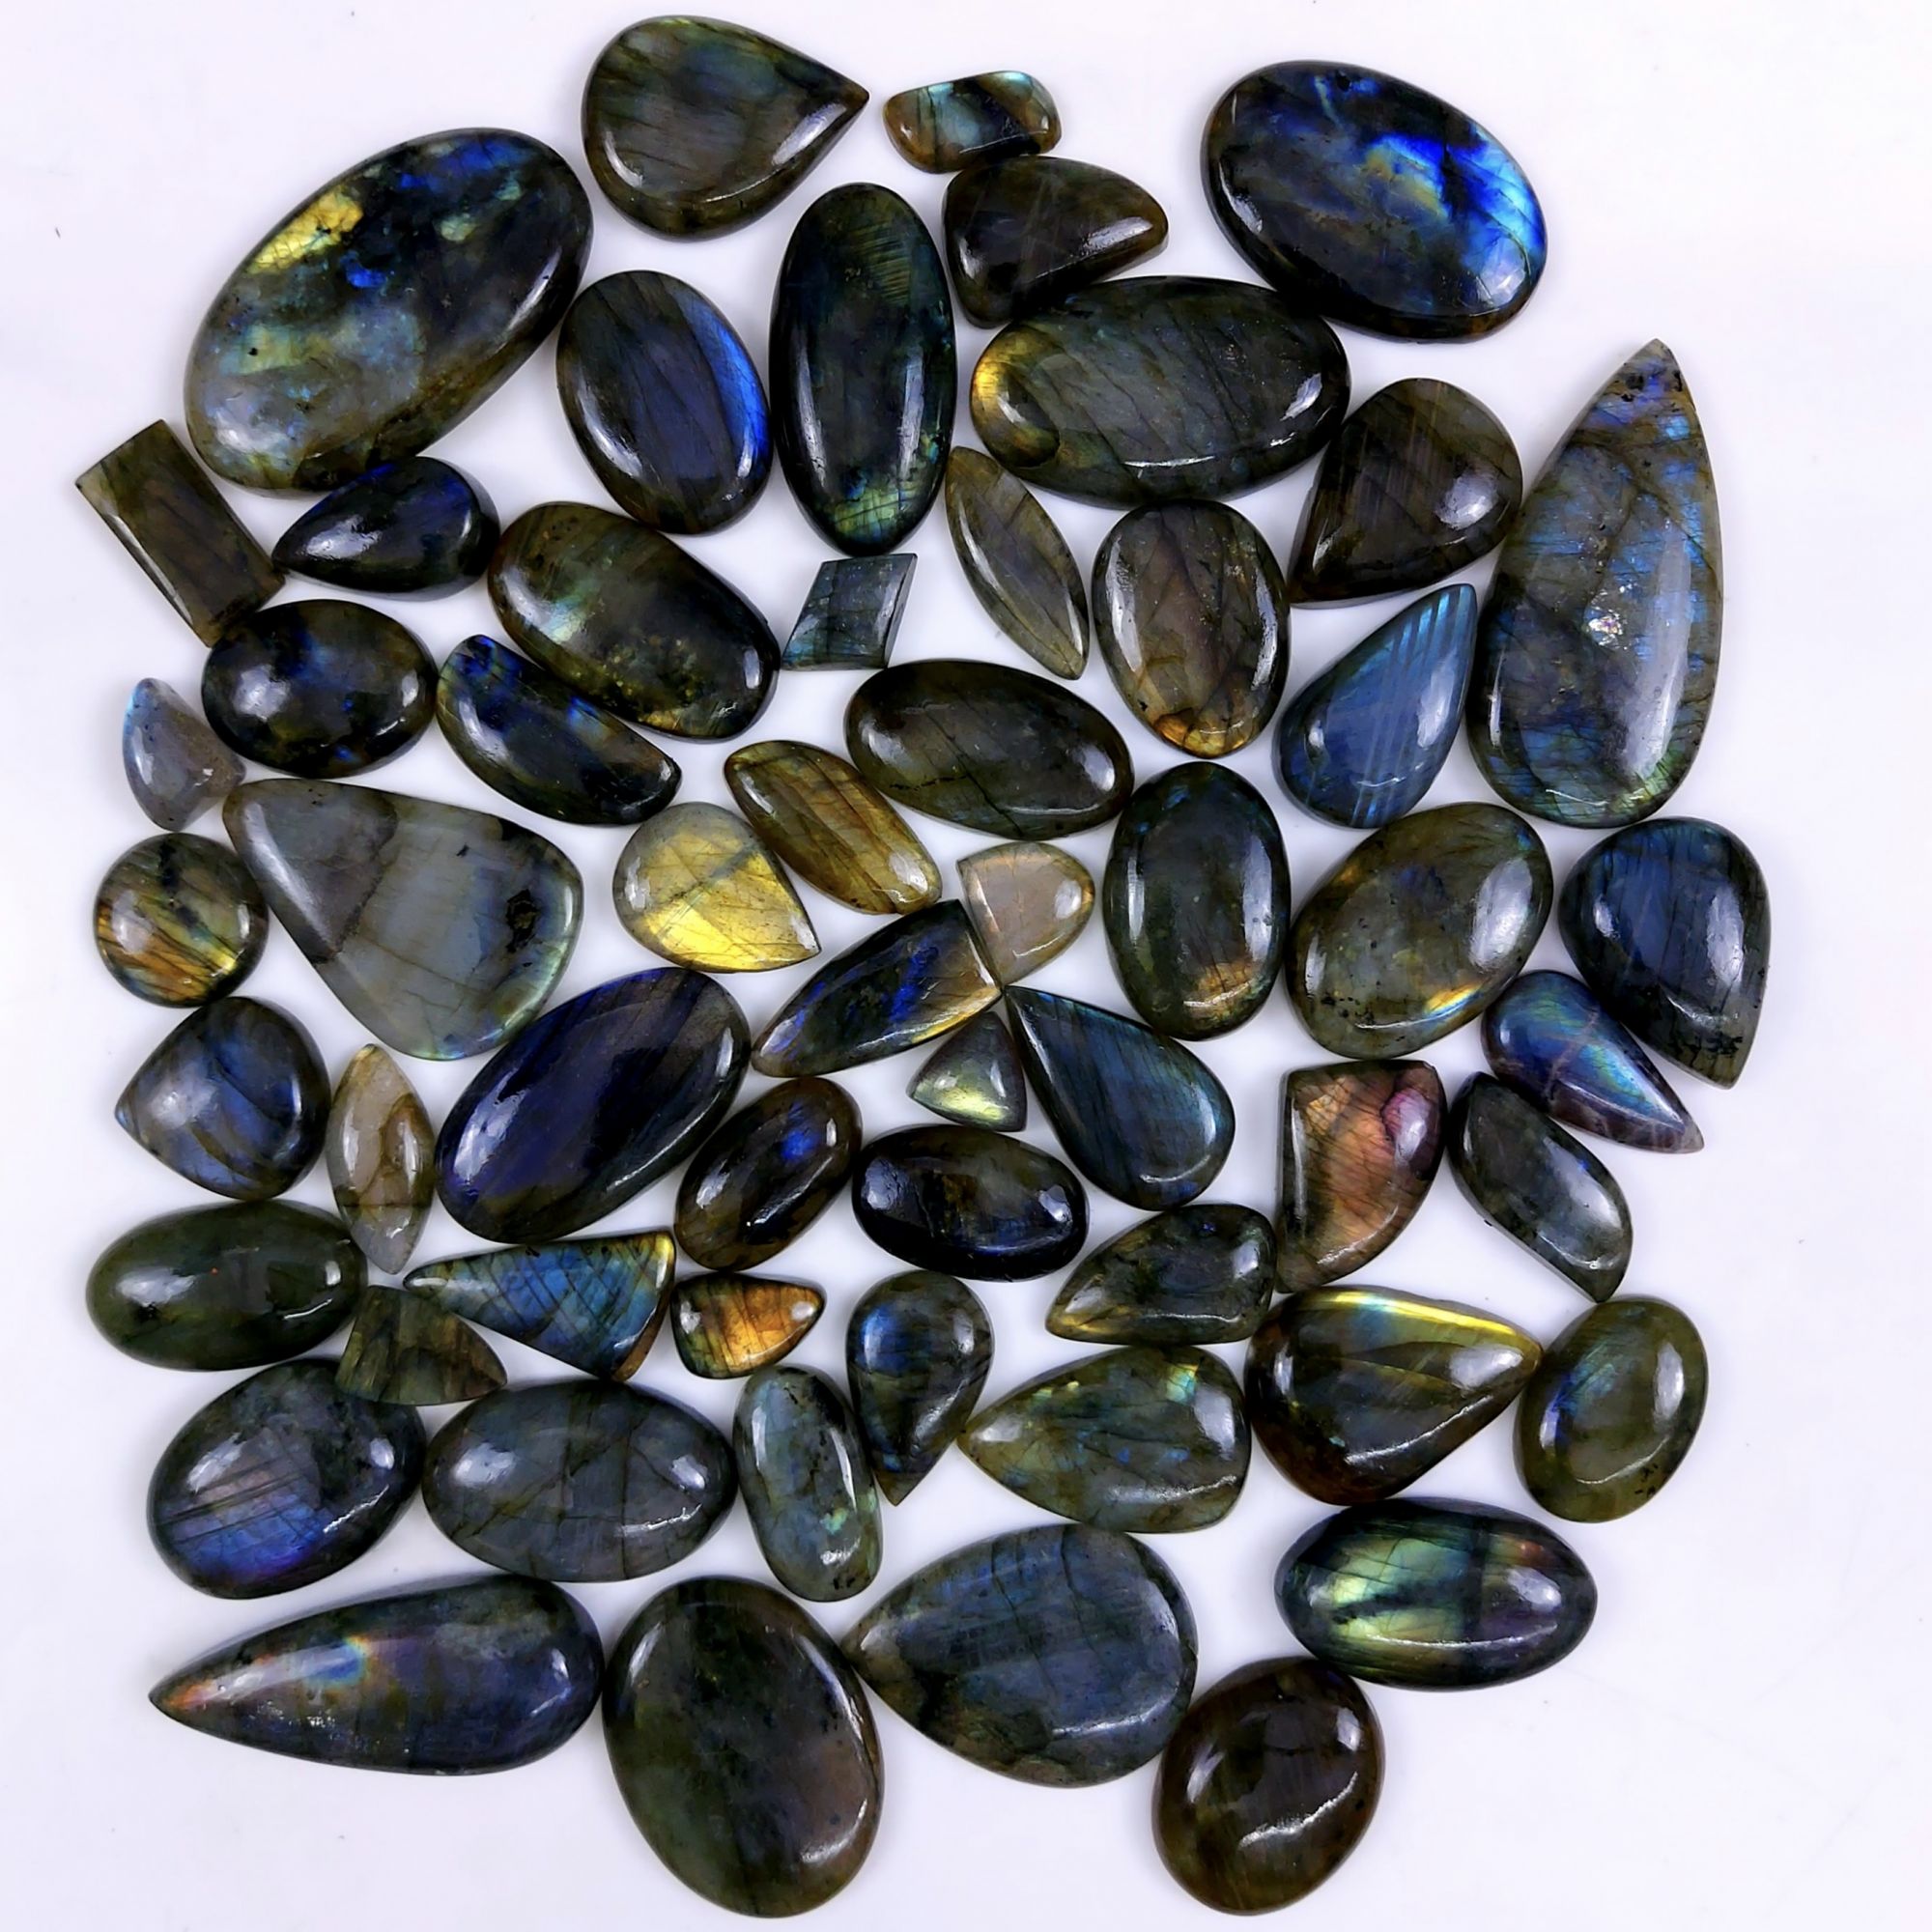 47pc 1839Cts Labradorite Cabochon Multifire Healing Crystal For Jewelry Supplies, Labradorite Necklace Handmade Wire Wrapped Gemstone Pendant 50x30 16x12mm#6345